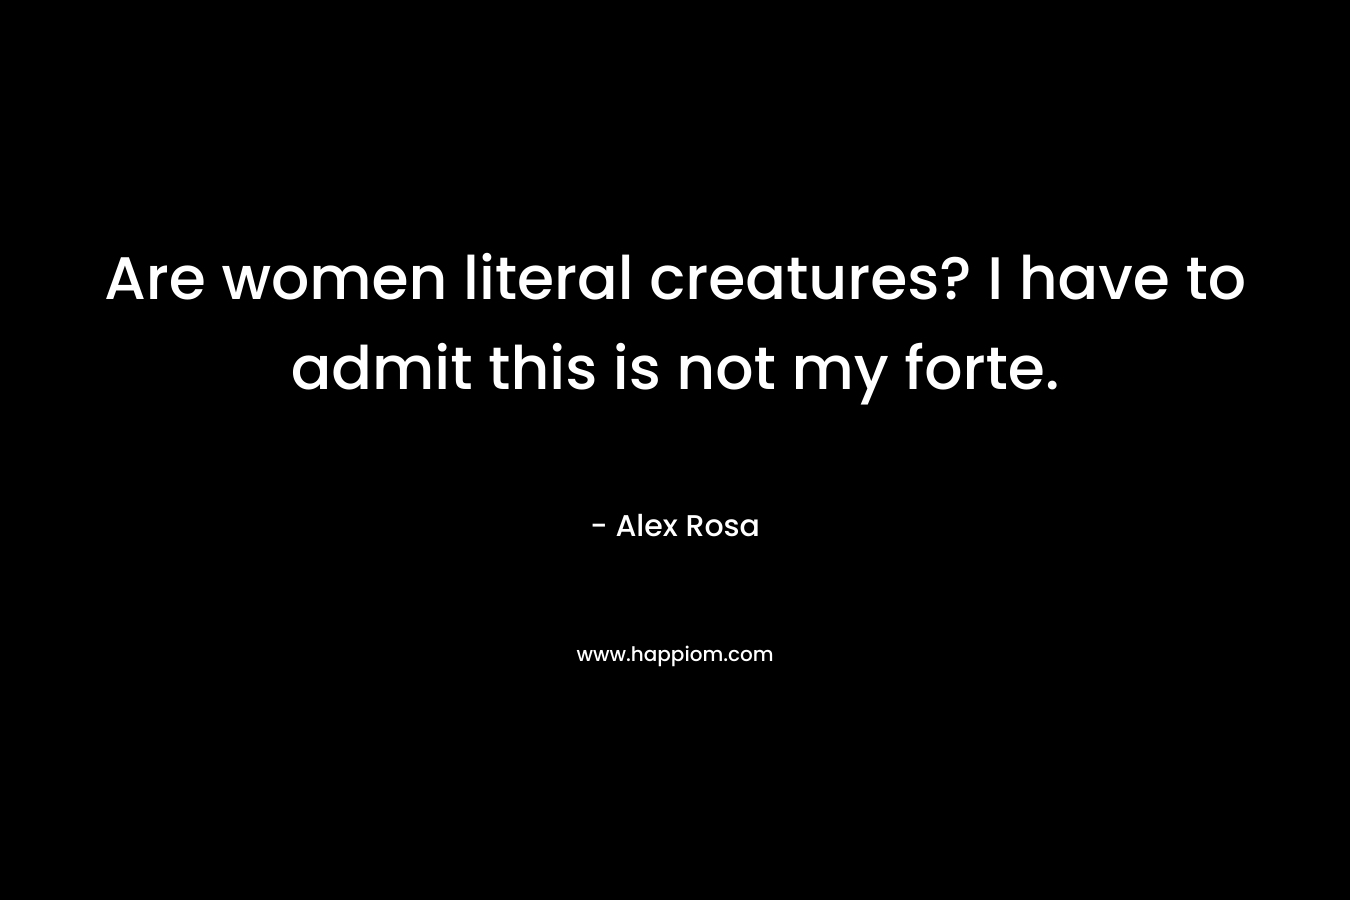 Are women literal creatures? I have to admit this is not my forte. – Alex Rosa